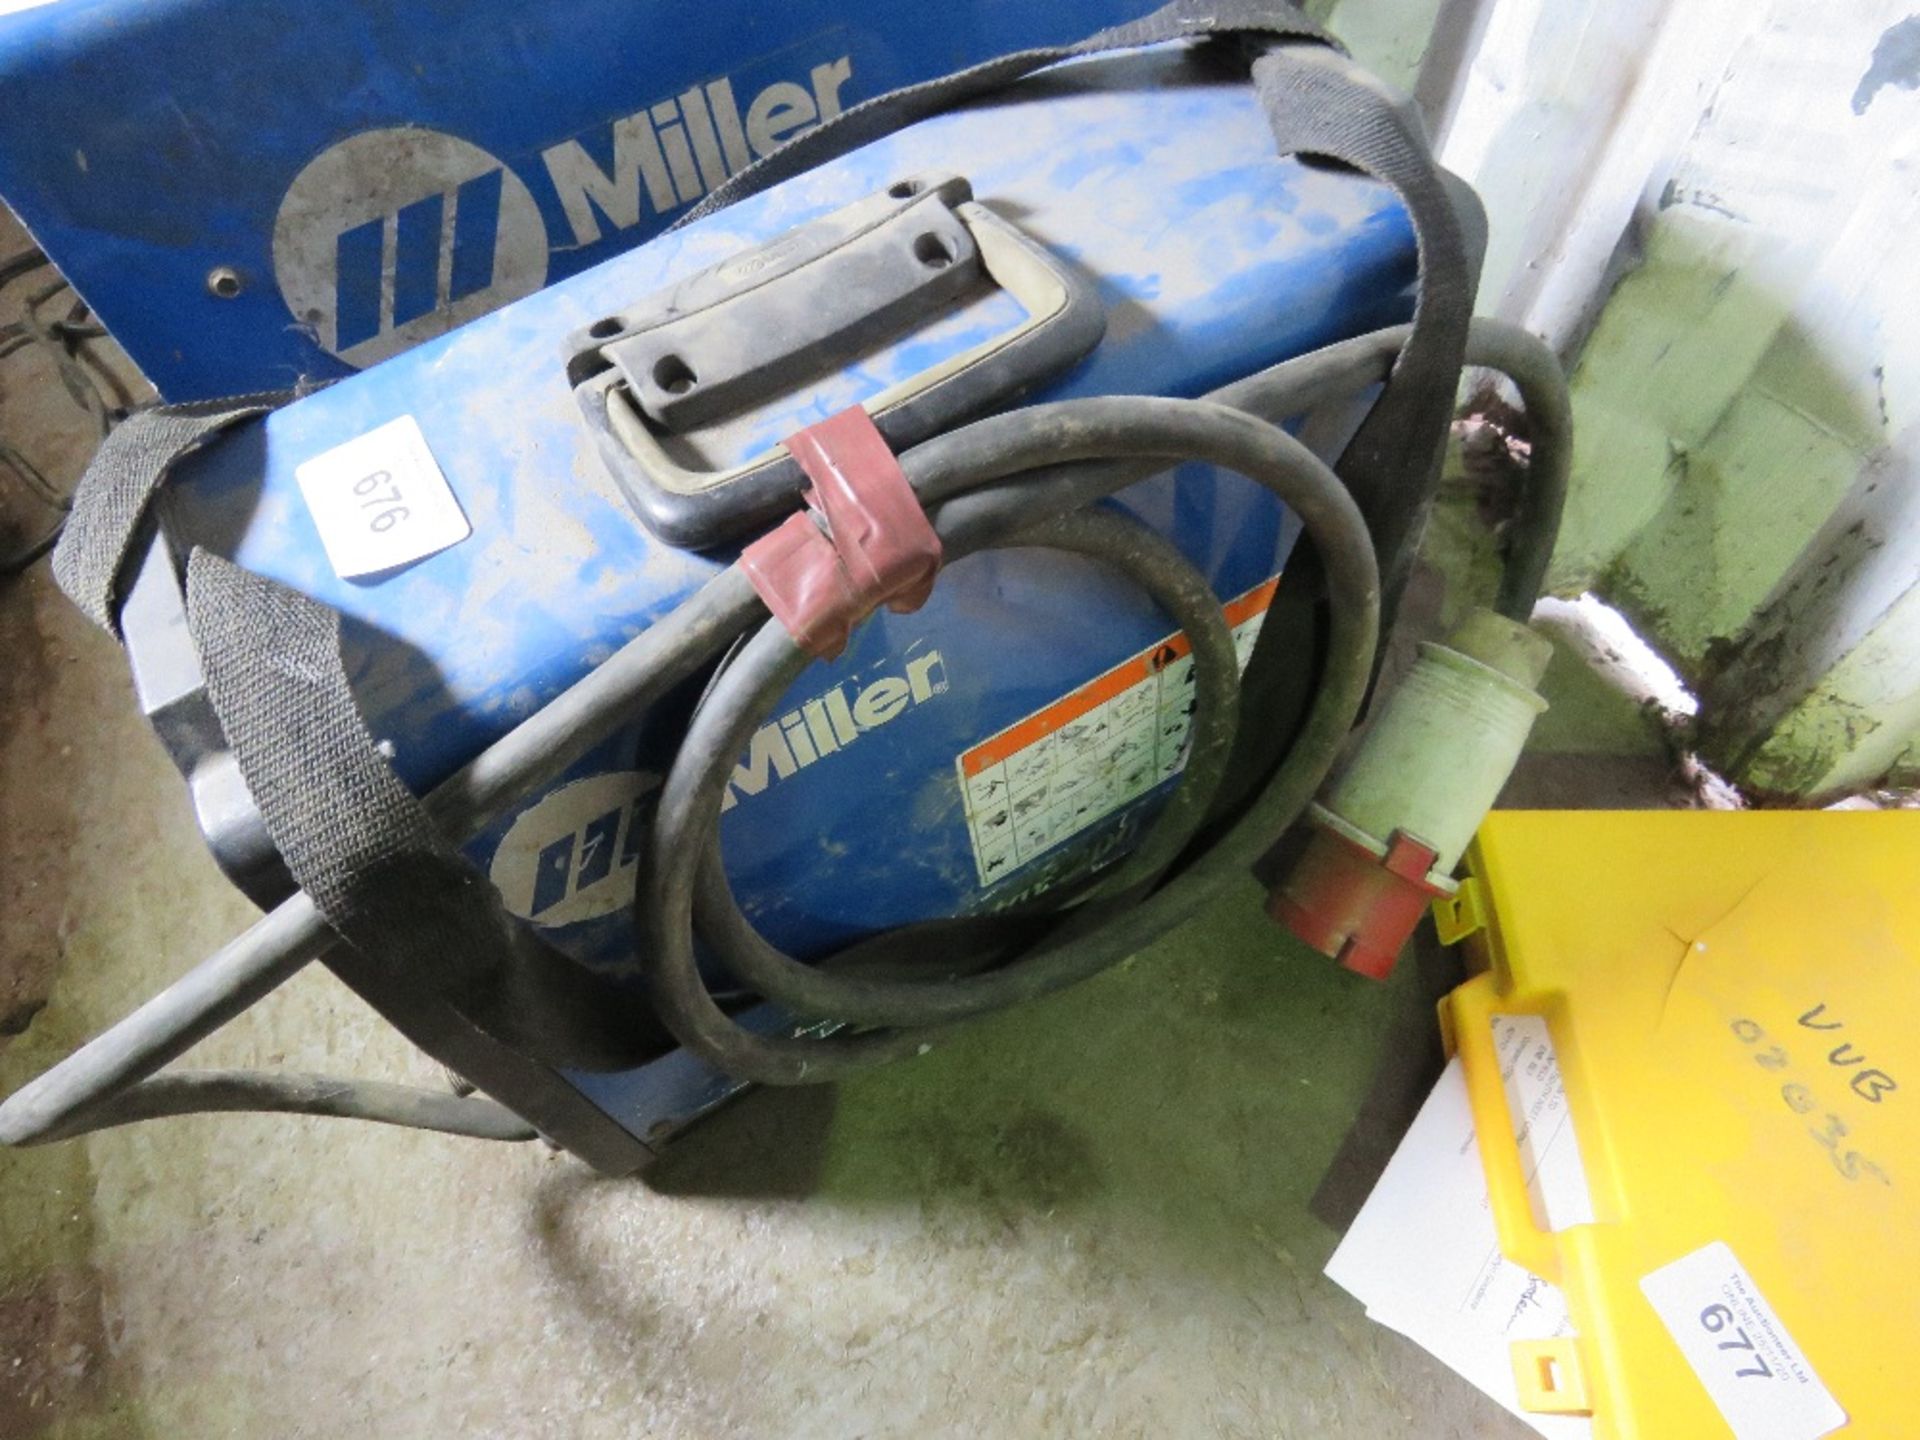 MILLER MAXSTAR 200 WELDER UNIT. SOURCED FROM DEPOT CLEARANCE DUE TO A CHANGE IN COMPANY POLICY.